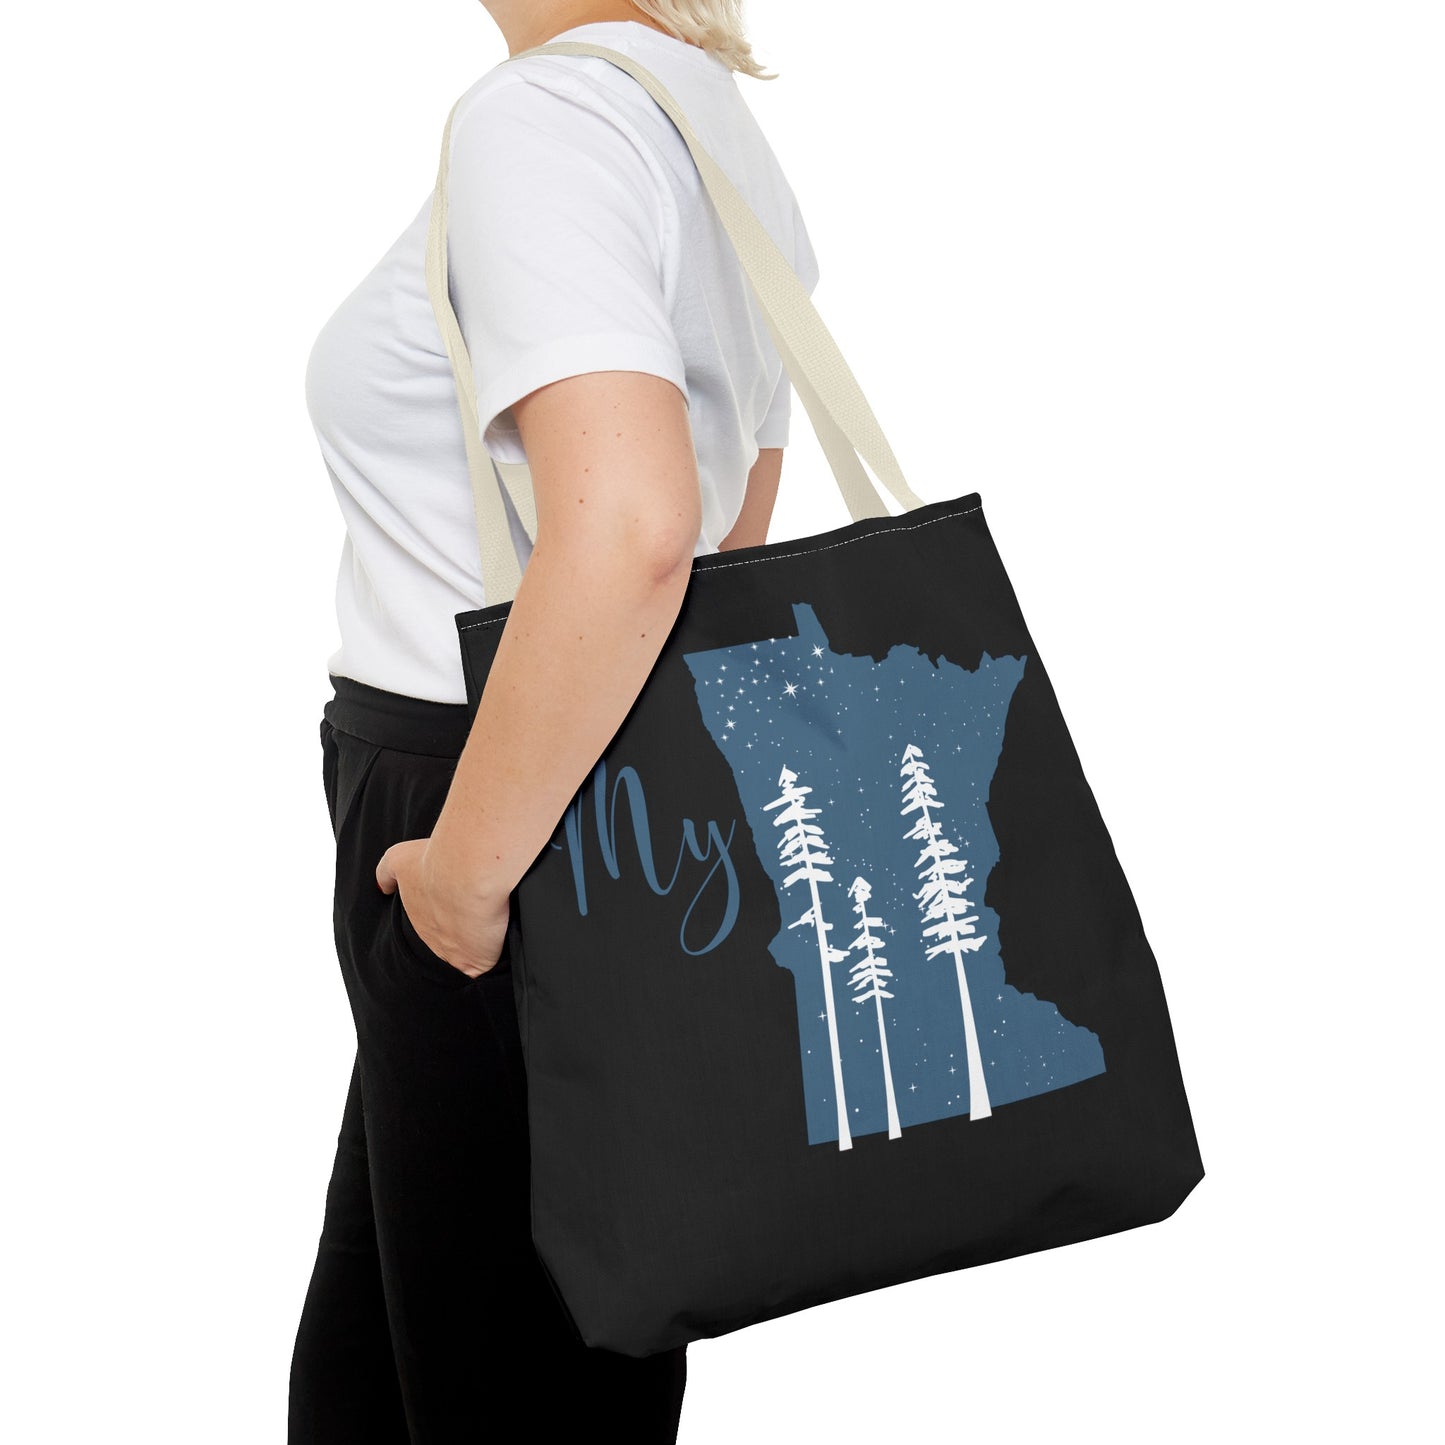 Tote Bag - My MN Trees